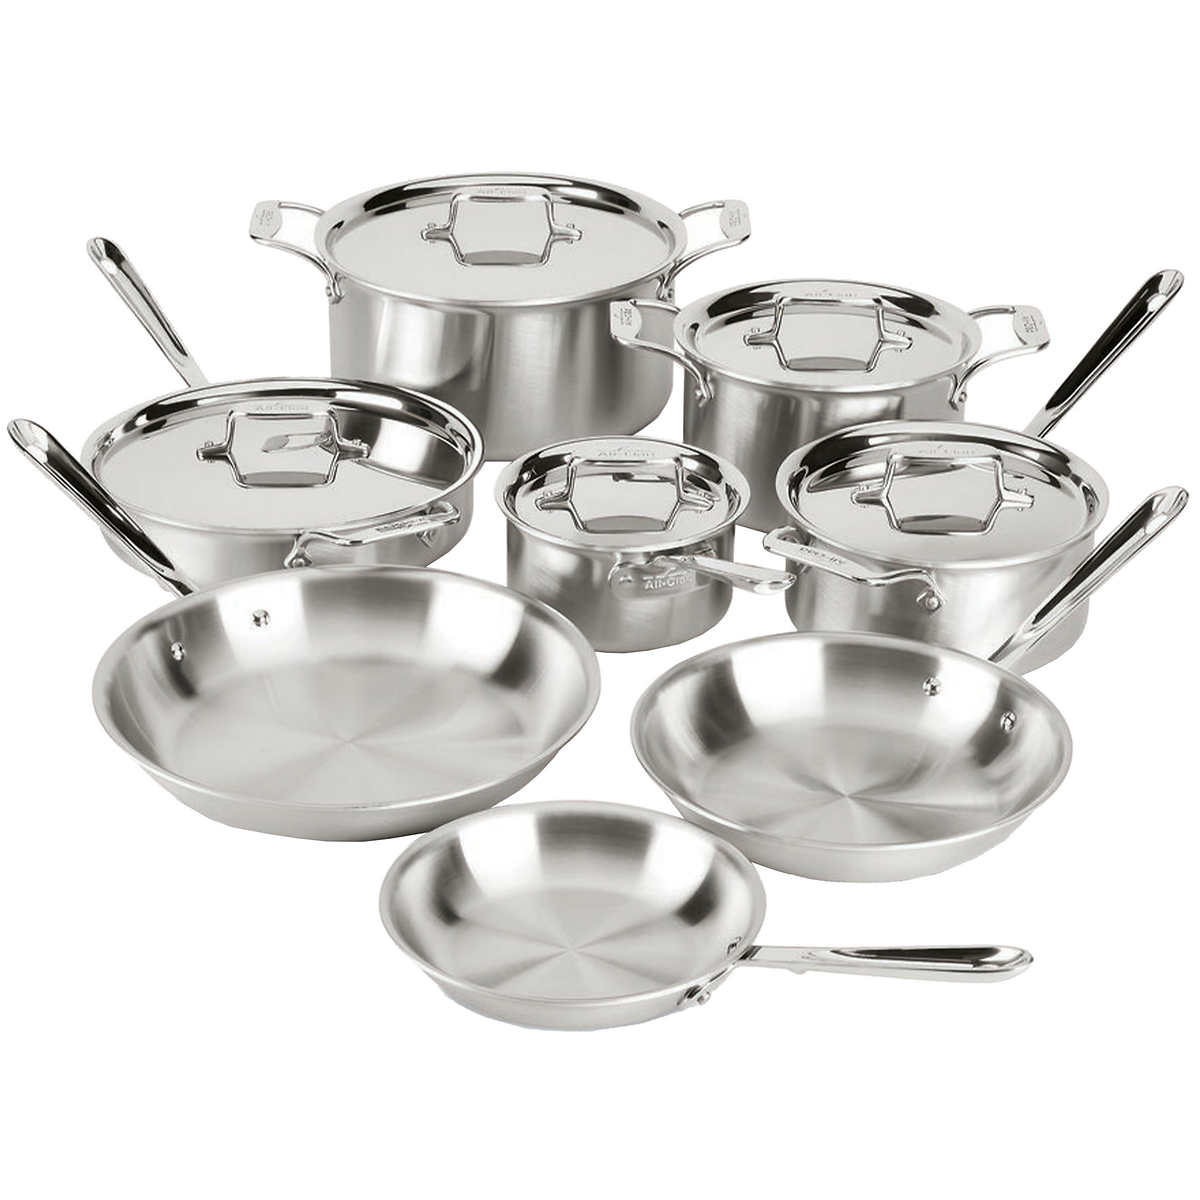 Stainless Clad Saucepan